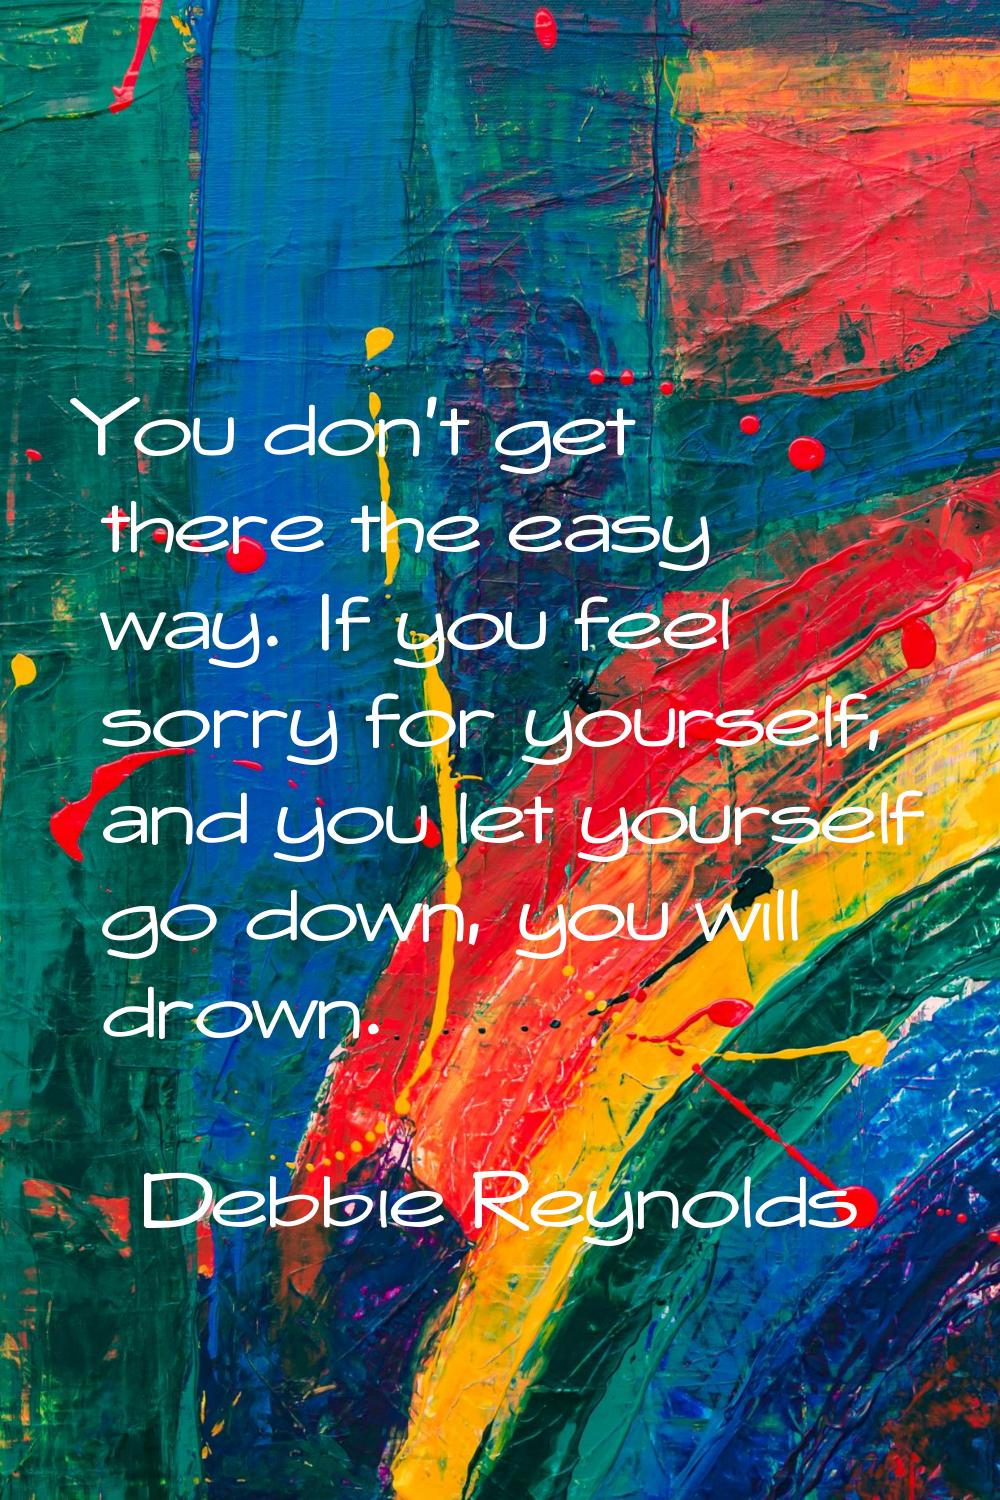 You don't get there the easy way. If you feel sorry for yourself, and you let yourself go down, you